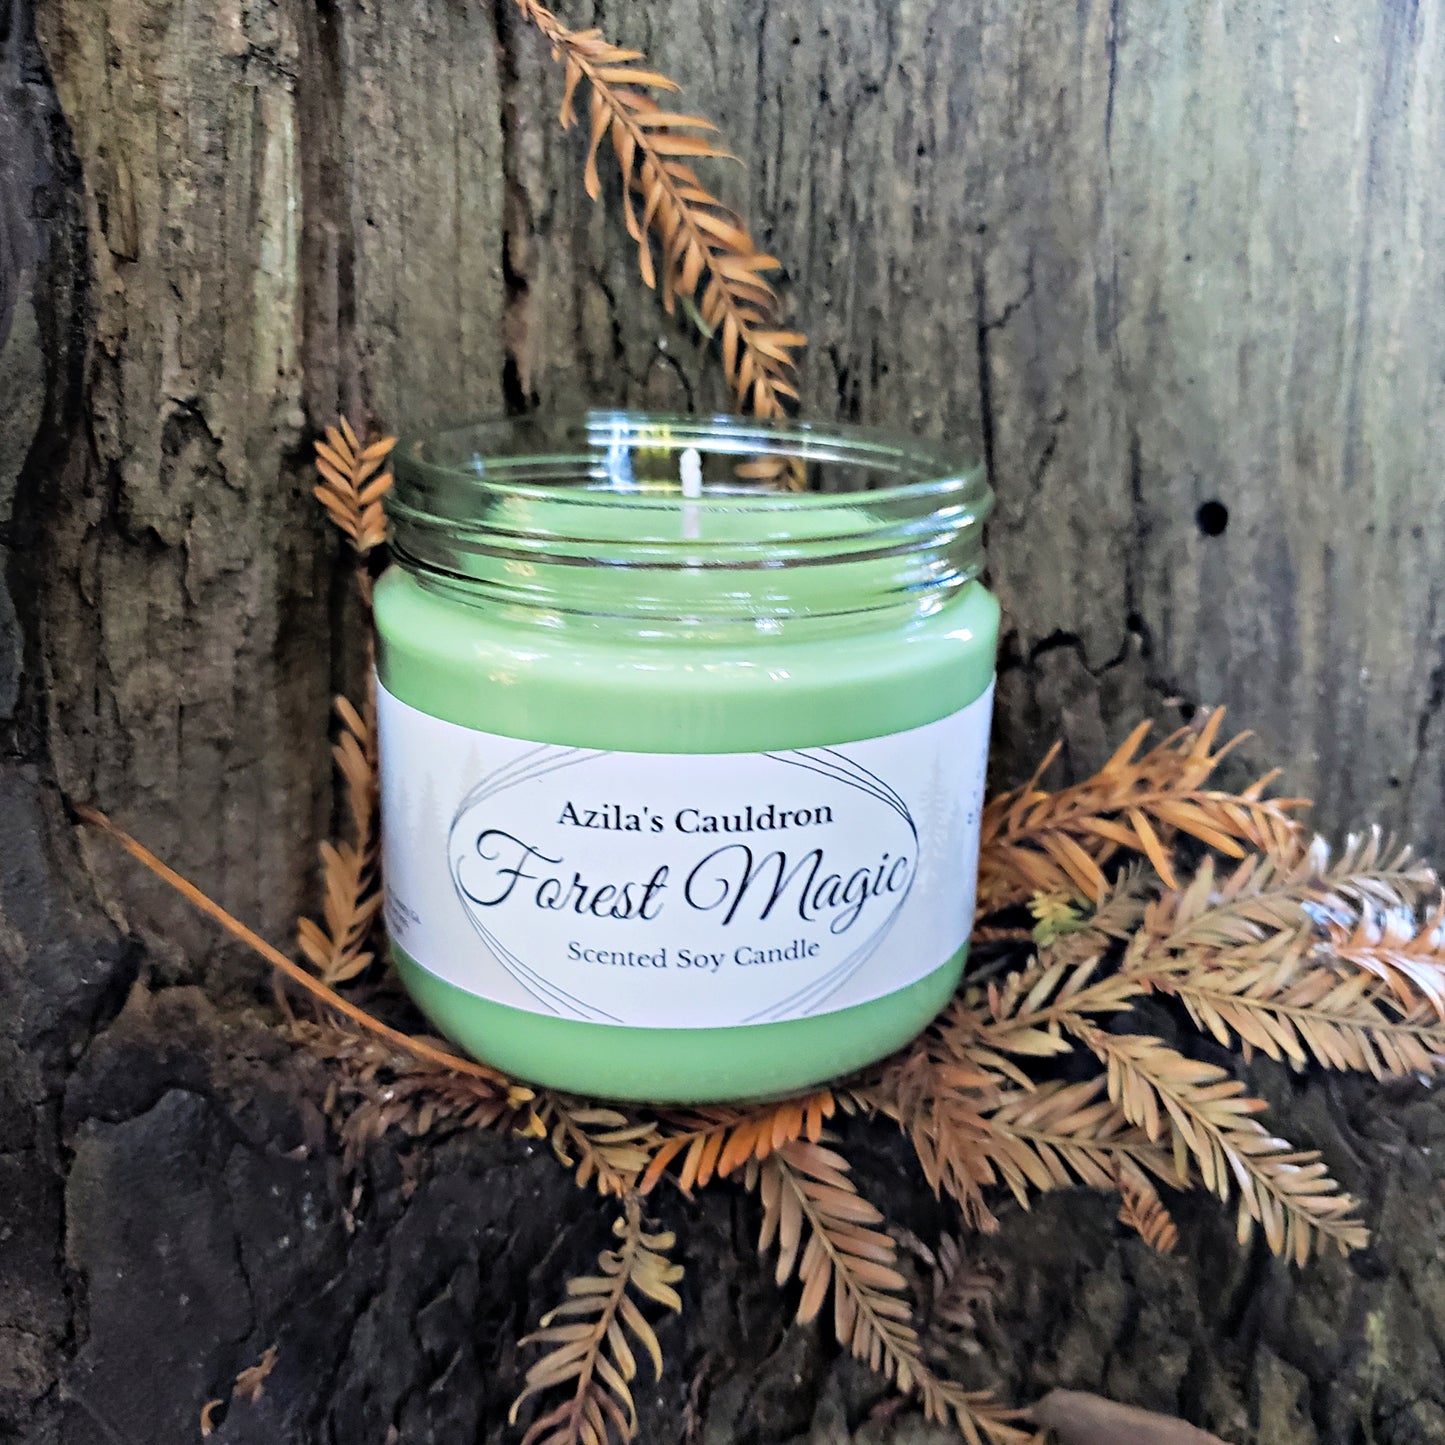 Forest Magic Scented Soy Candle